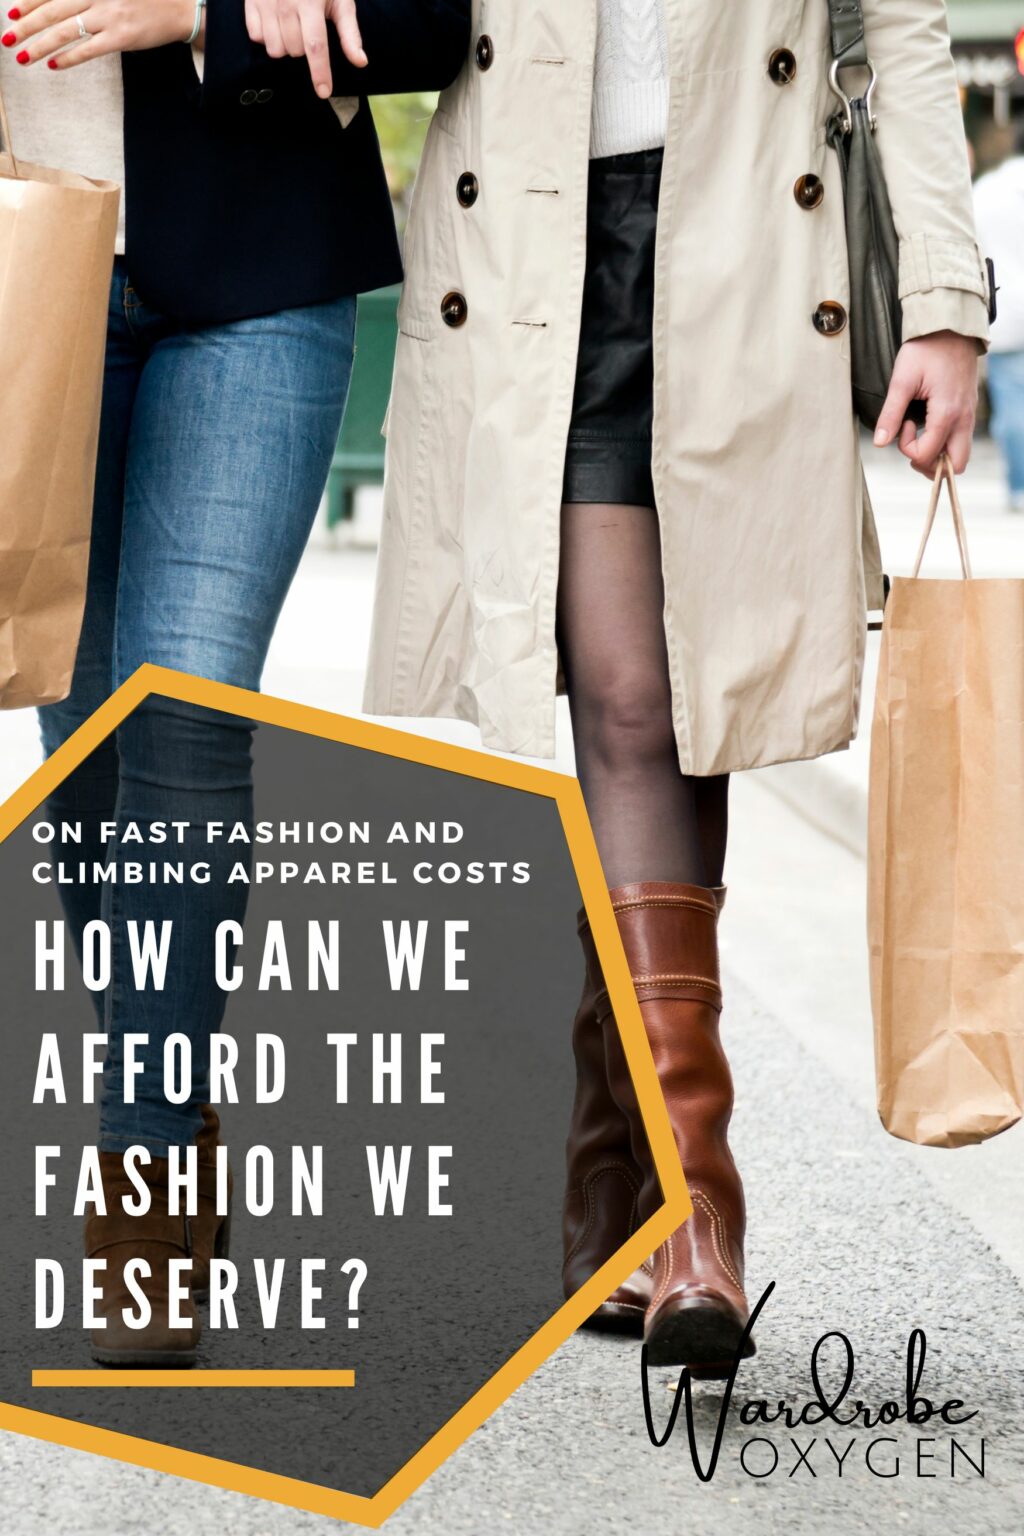 Fast Fashion Destroyed Our Concept of Price and Value | Wardrobe Oxygen